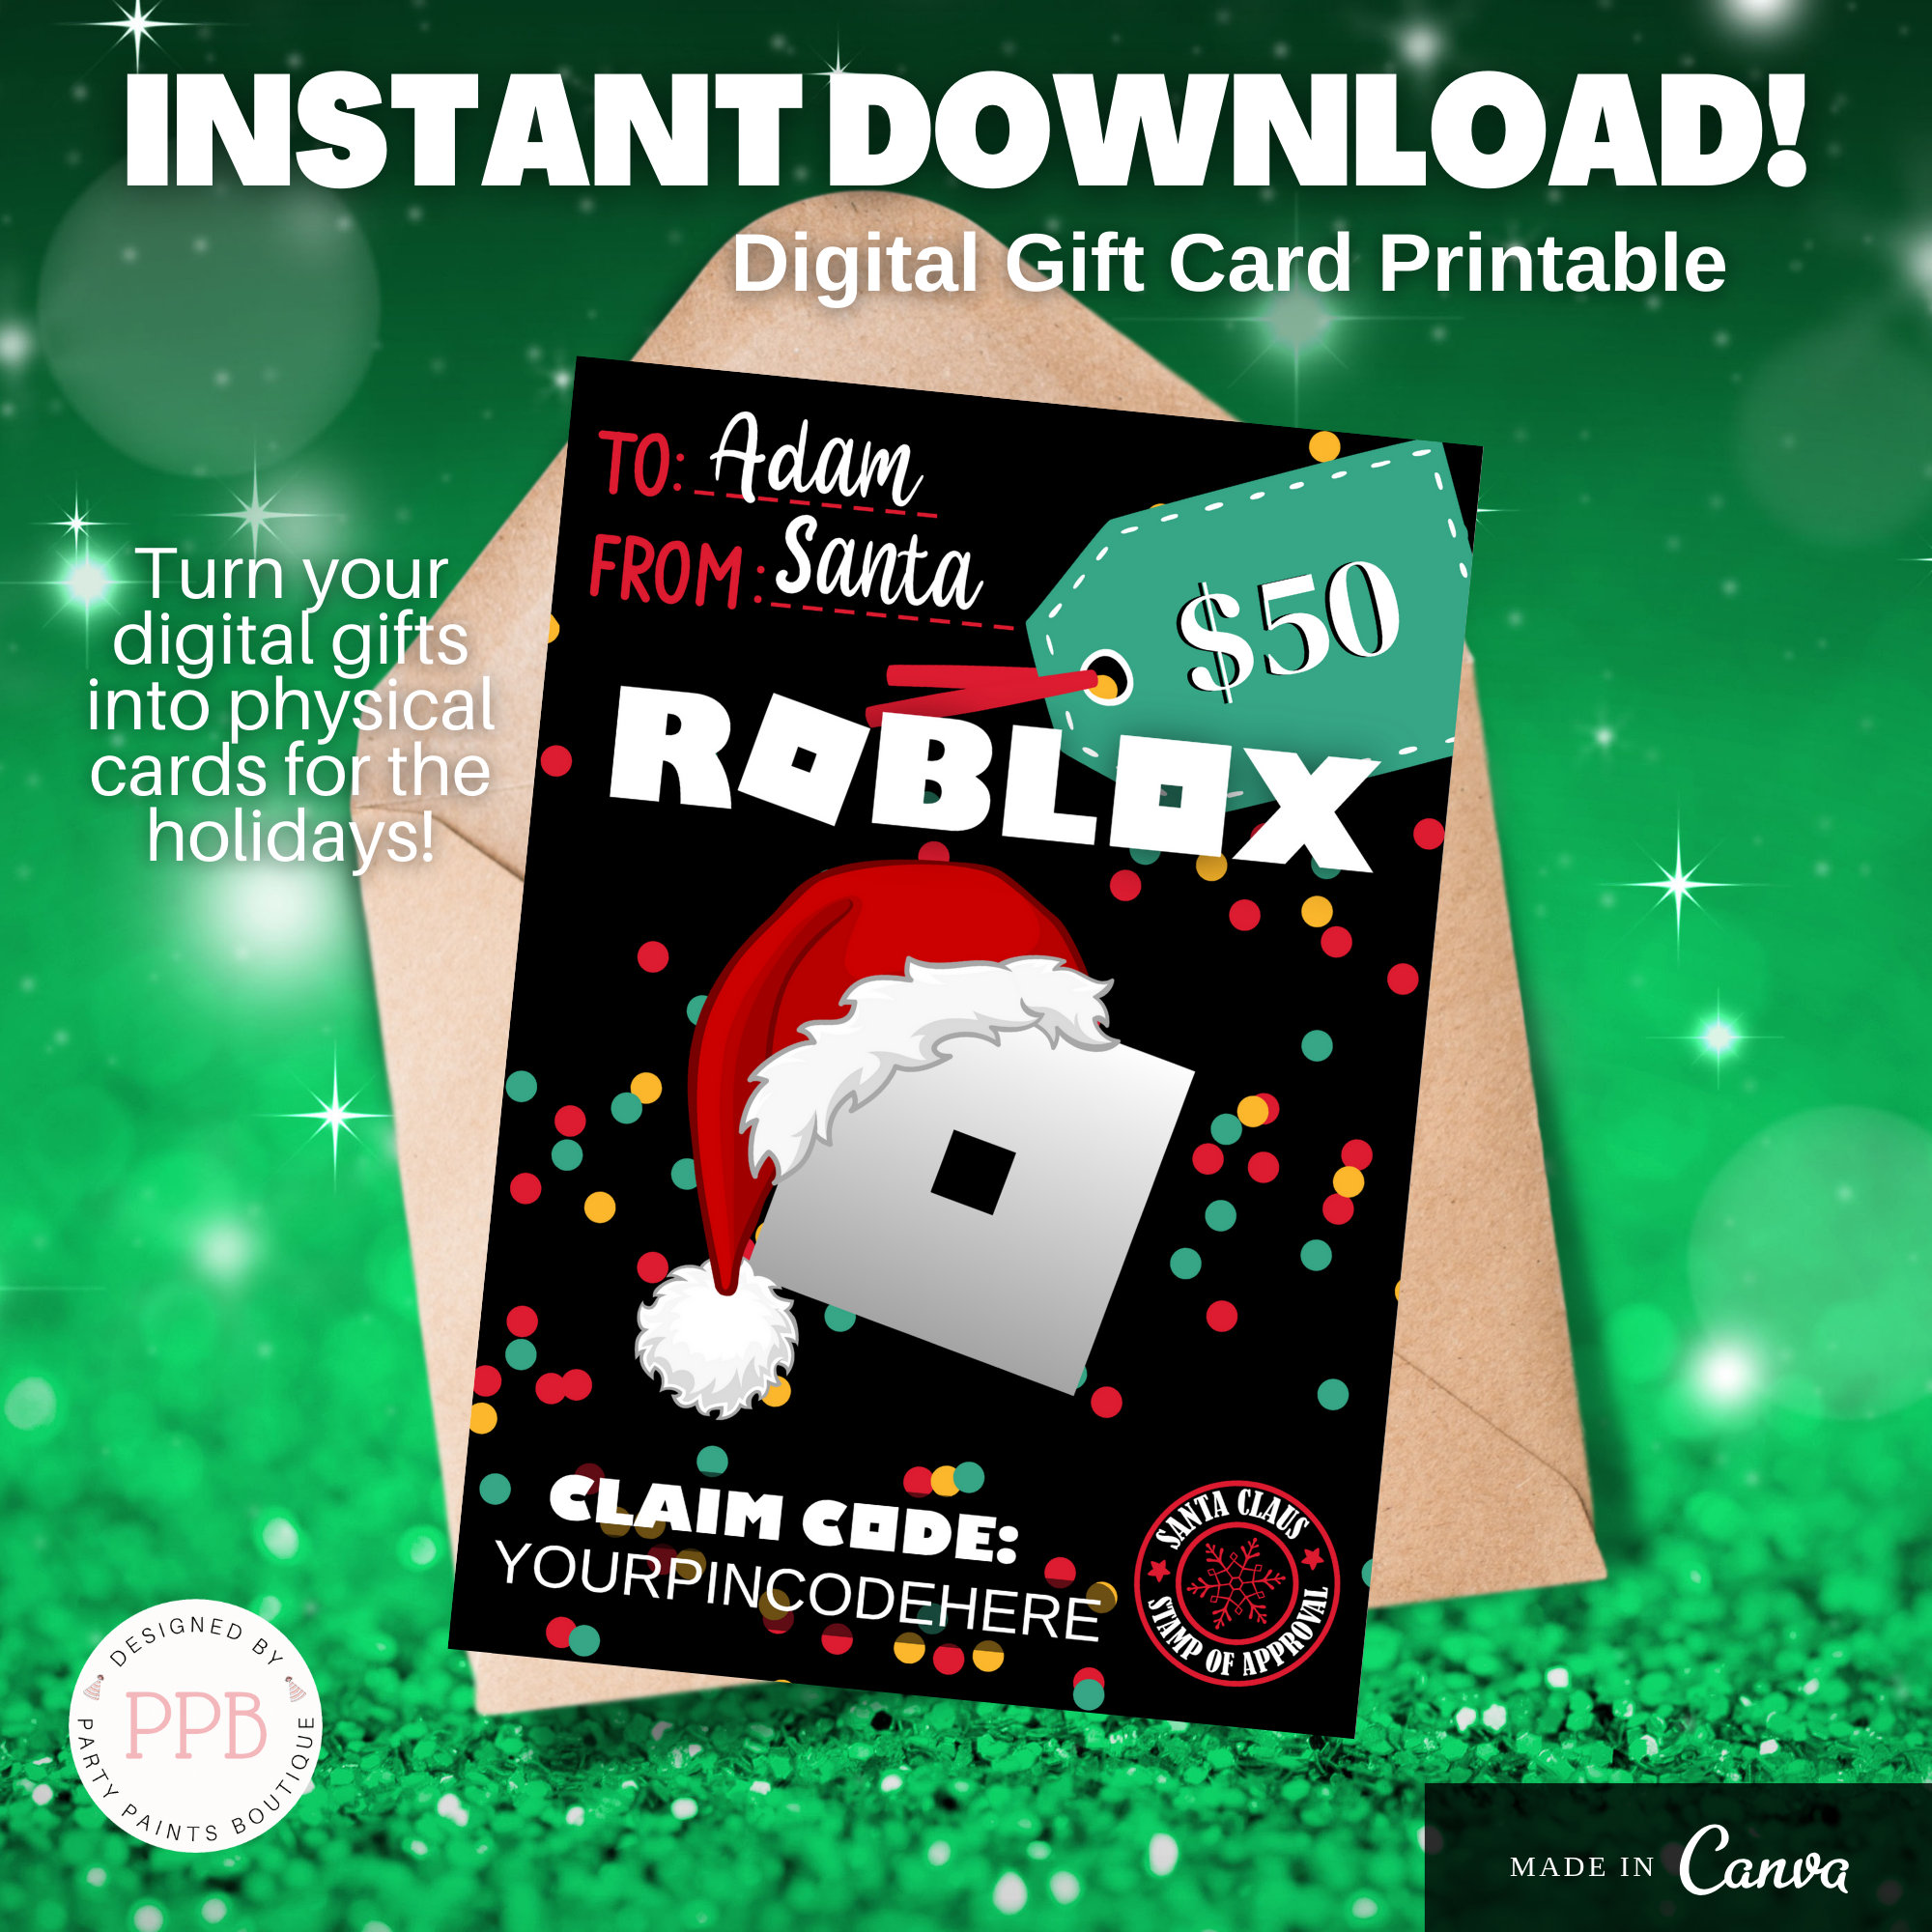 Robux Roblox Premium 1000 Gift Card - 1000 Robux Points